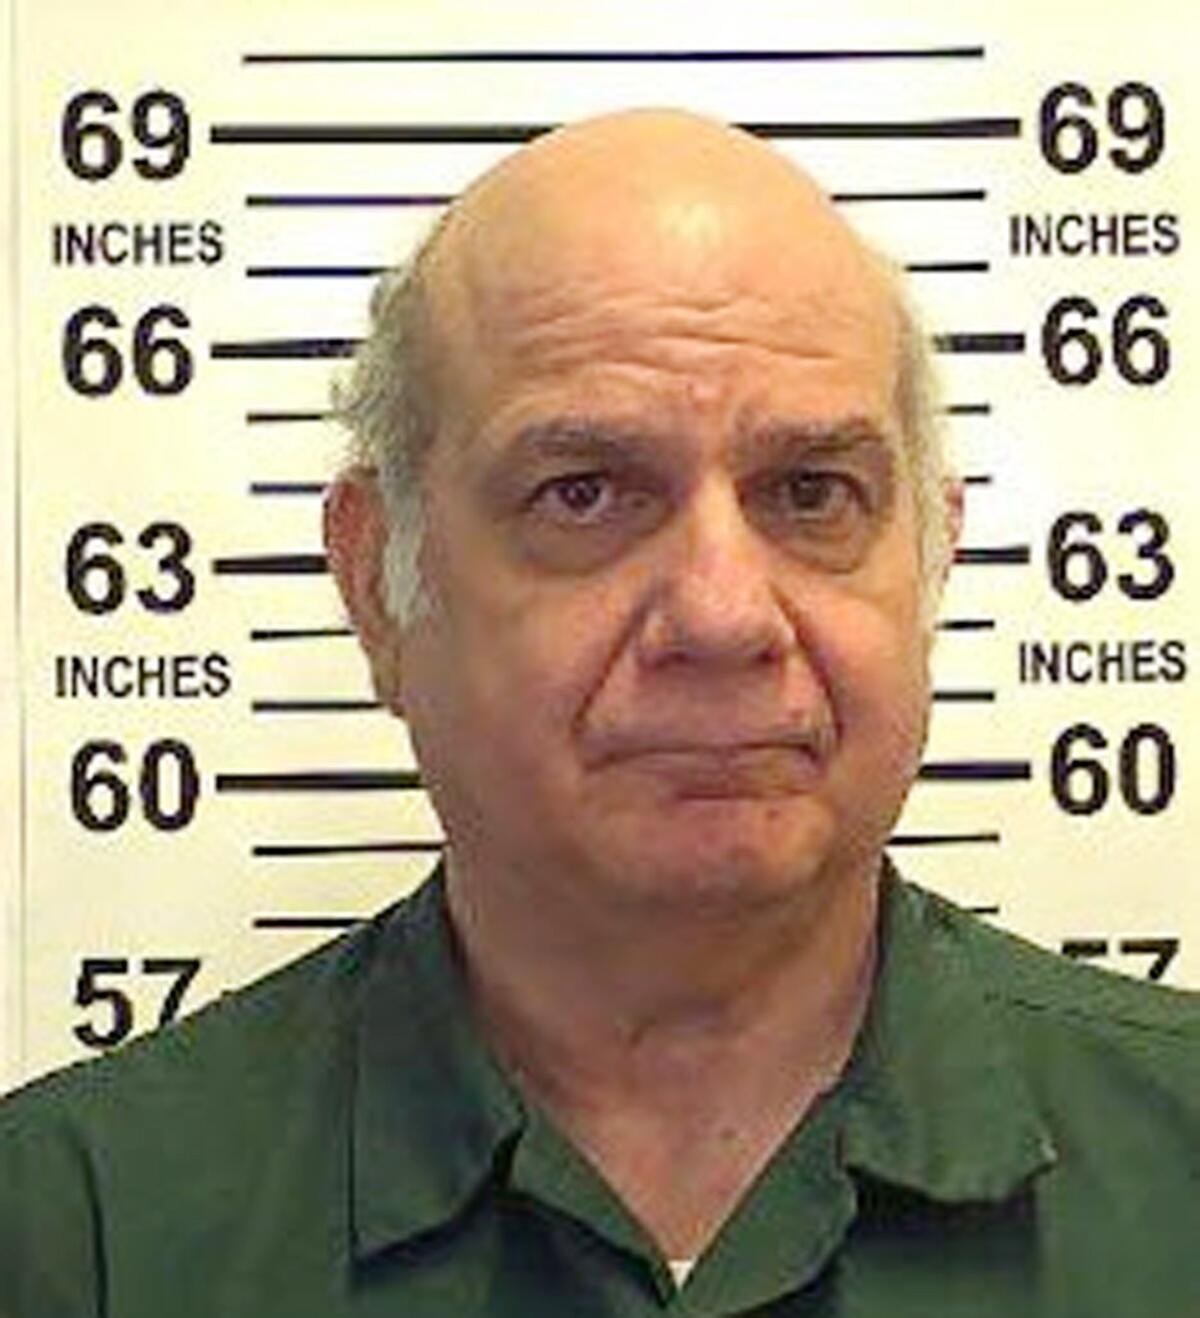 John Esposito, 64, who kidnapped Katie Beers in December 1992 and held her prisoner in an underground dungeon for 17 days, was found dead in his cell at Sing Sing on Wednesday.